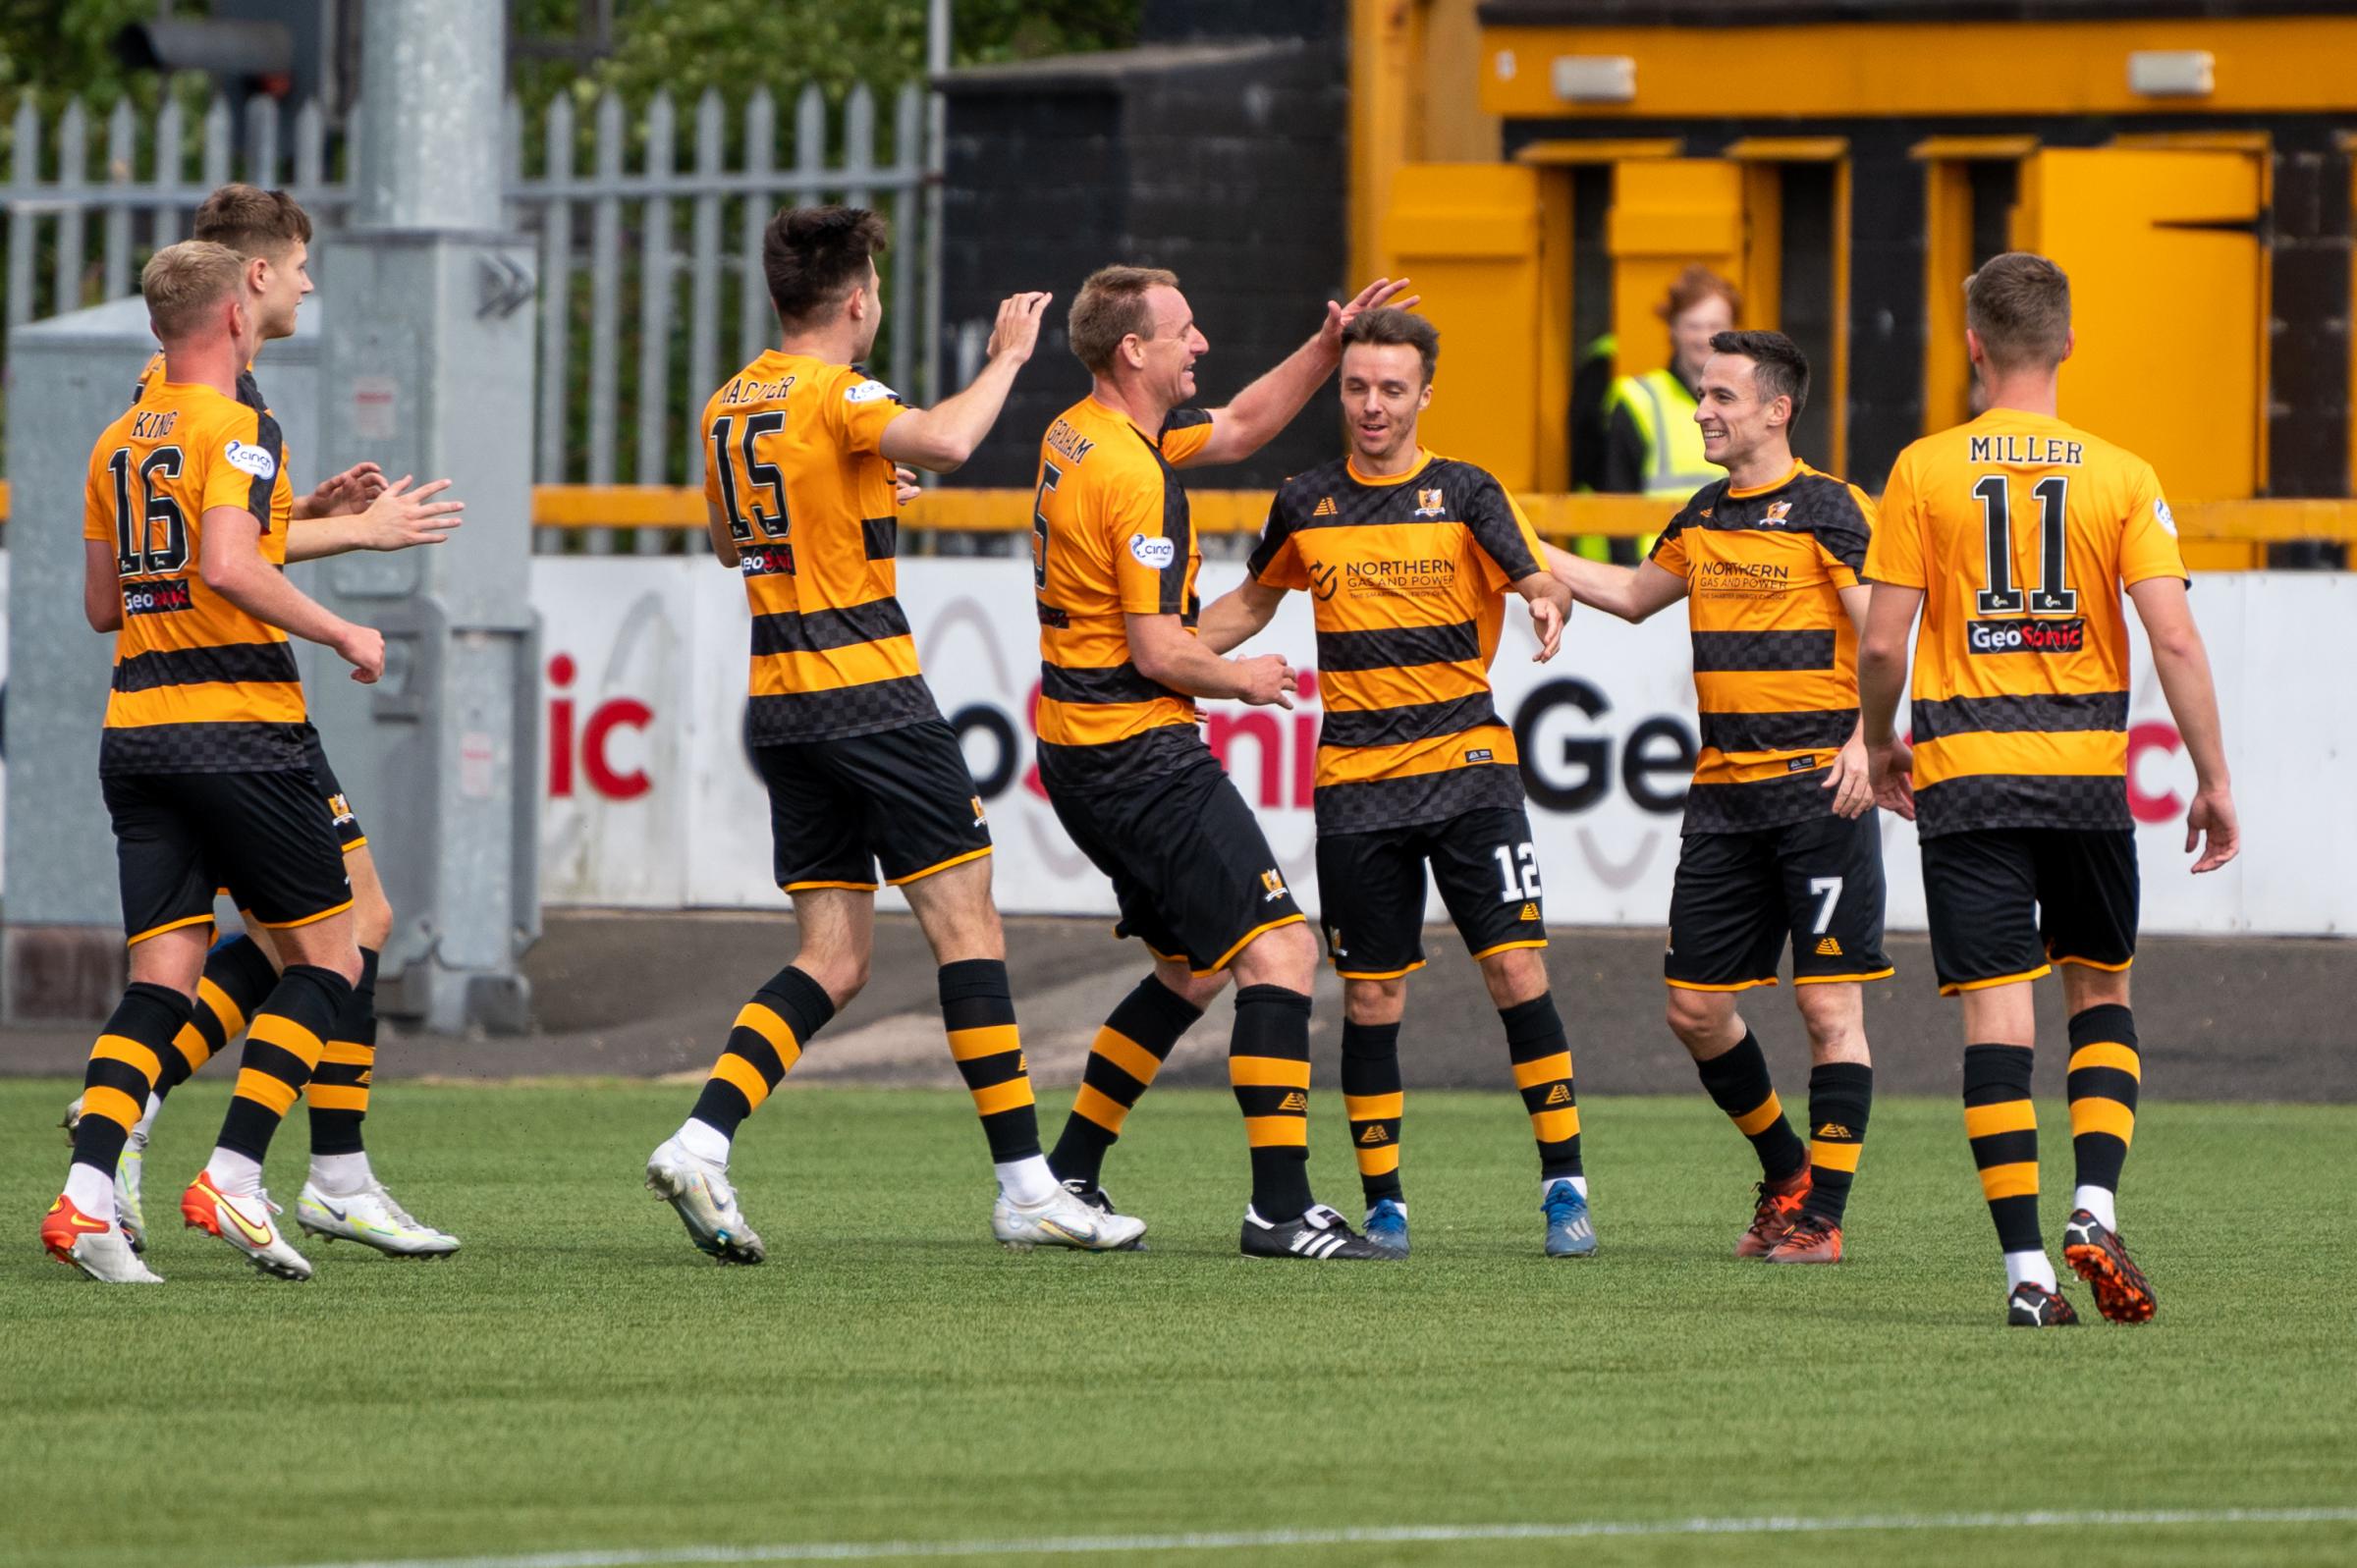 Alloa 3-1 Kelty: Rice encouraged by first league win